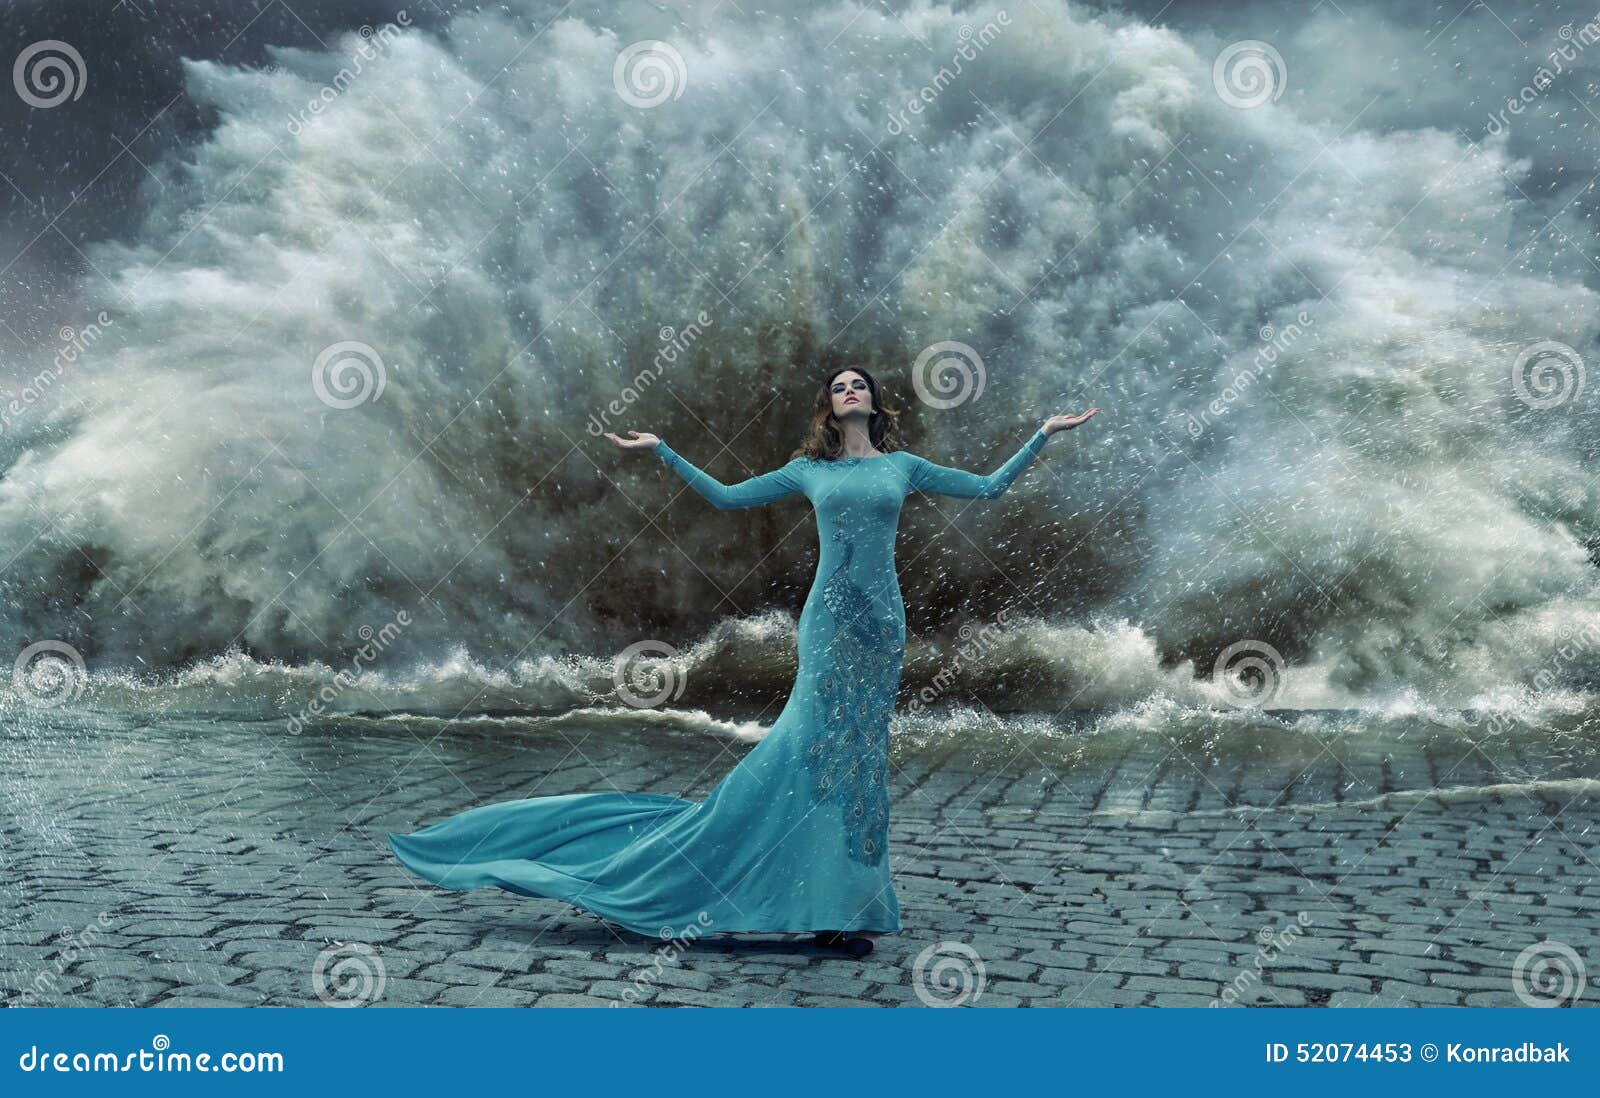 Lady of the storm